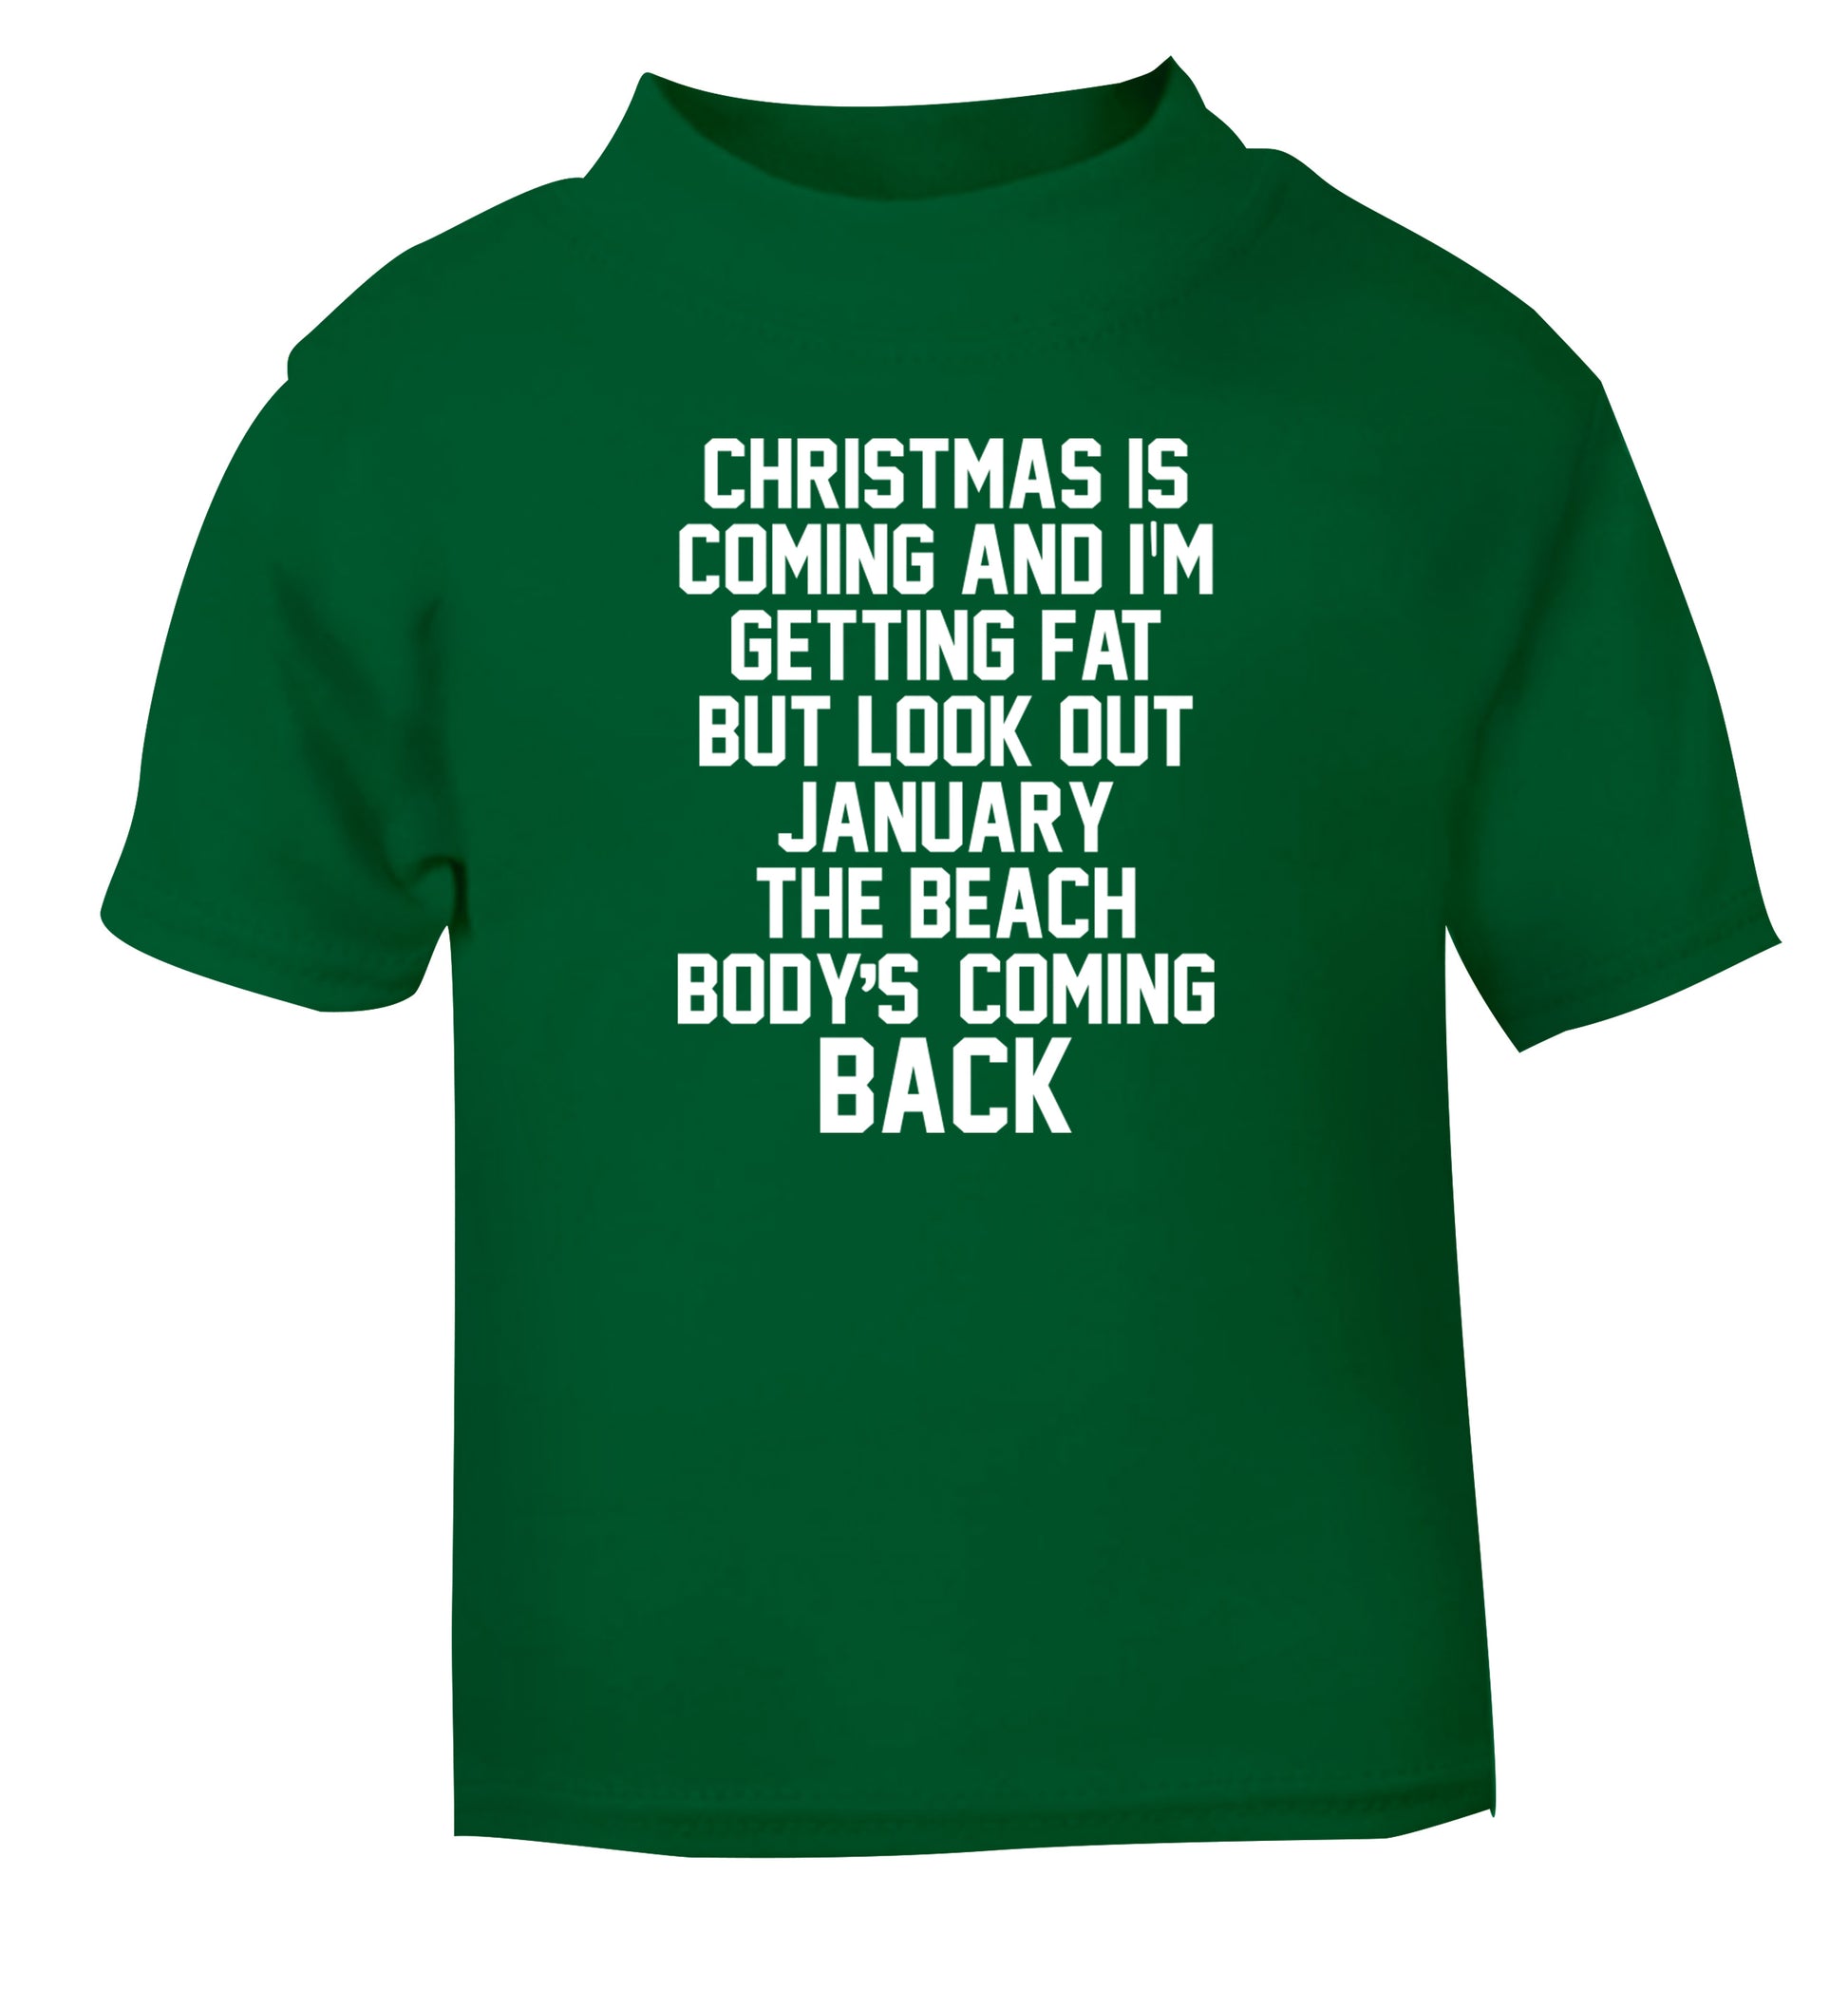 Christmas is coming and I'm getting fat but look out January the beach body's coming back! green Baby Toddler Tshirt 2 Years